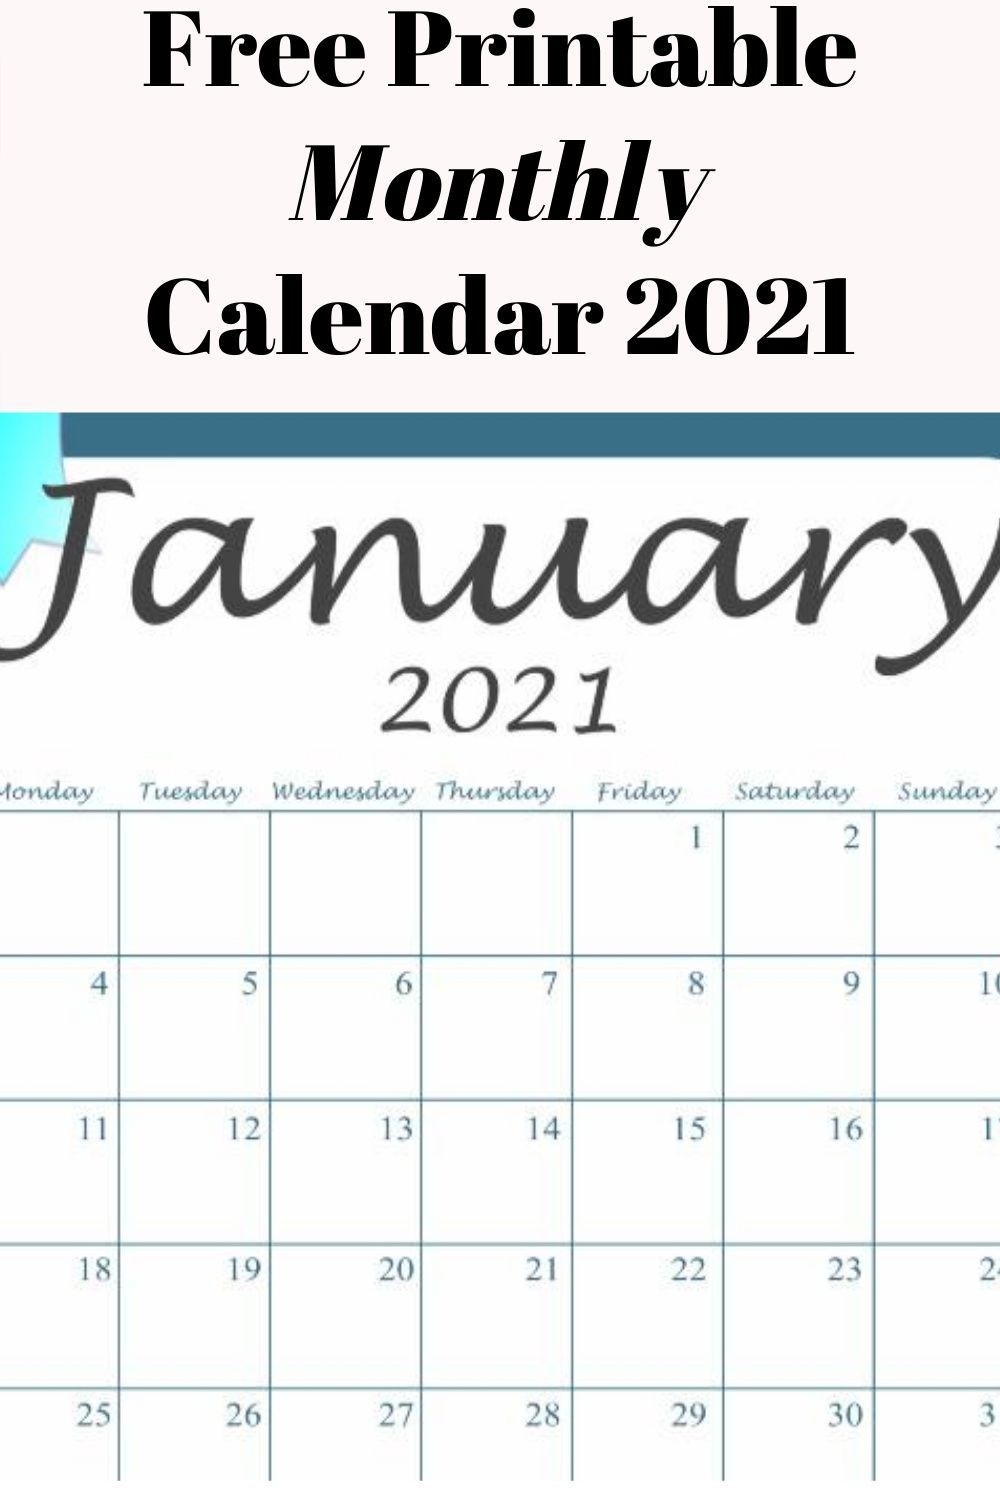 2021 Monthly Calendar Printable – Free Monthly Calendar-2021 Calendar Free Printable Bills